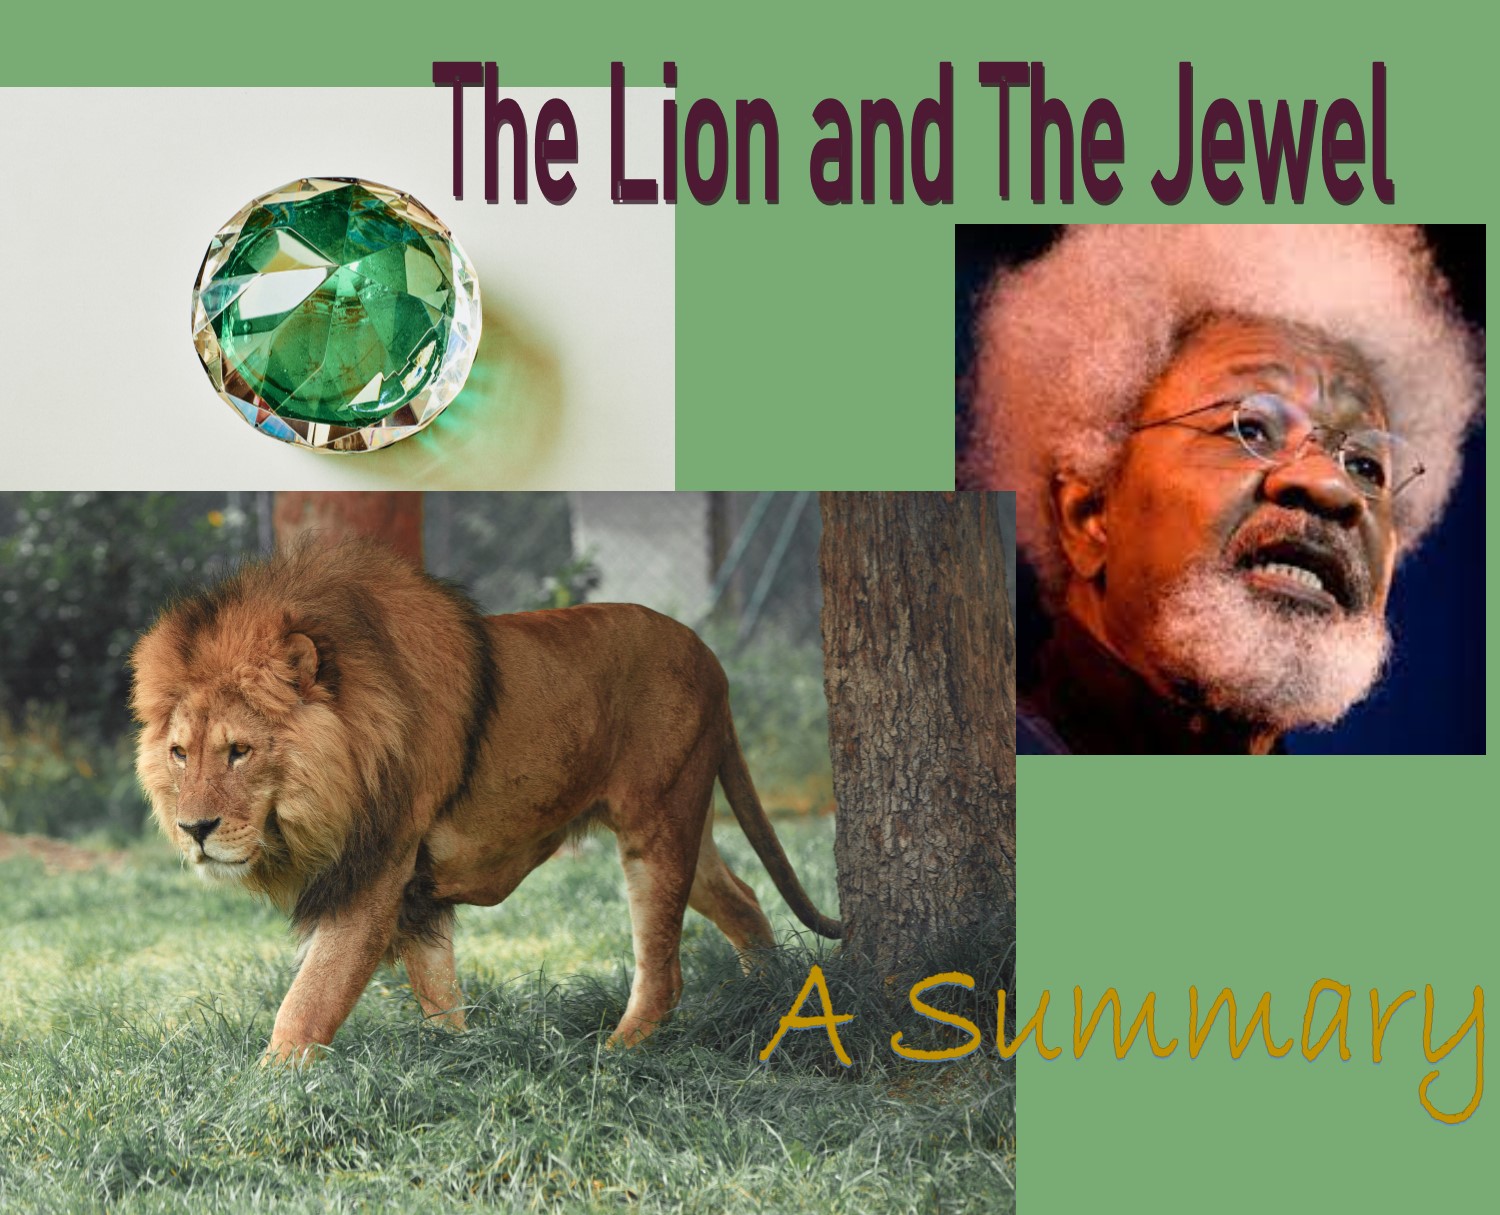 The Lion and the Jewel